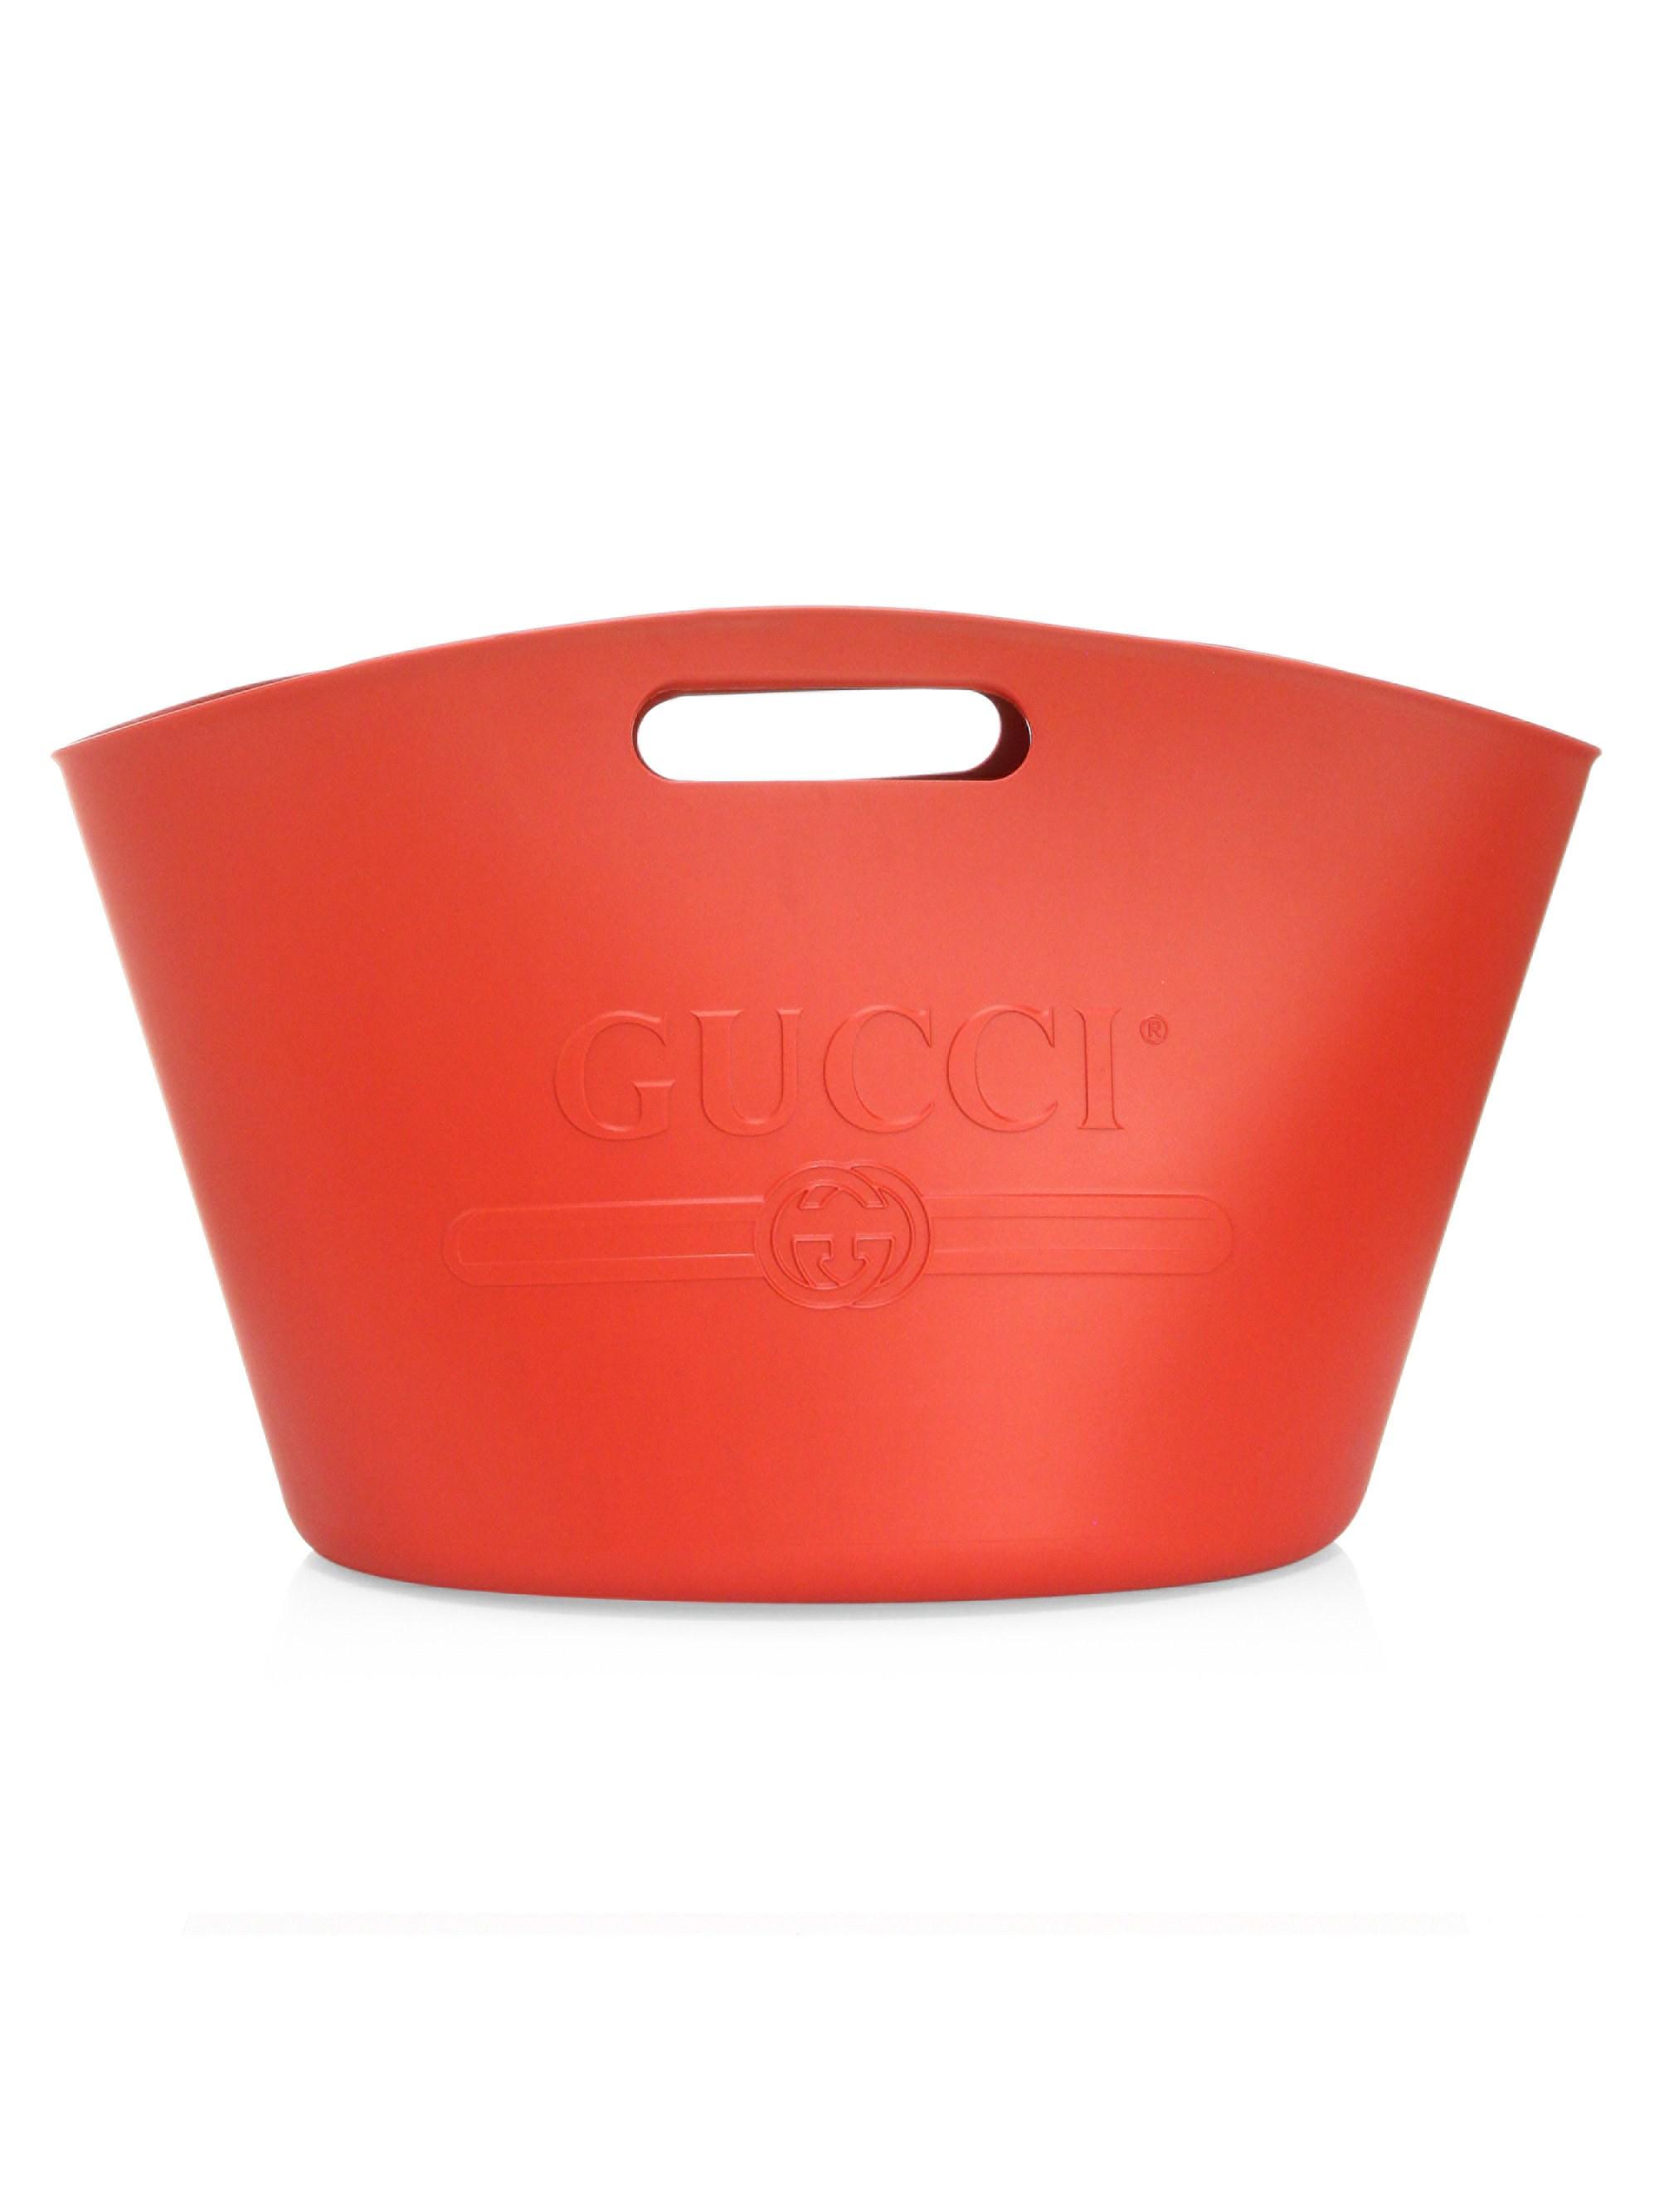 Gucci Rubber Bucket Tote Bag in Red - Lyst